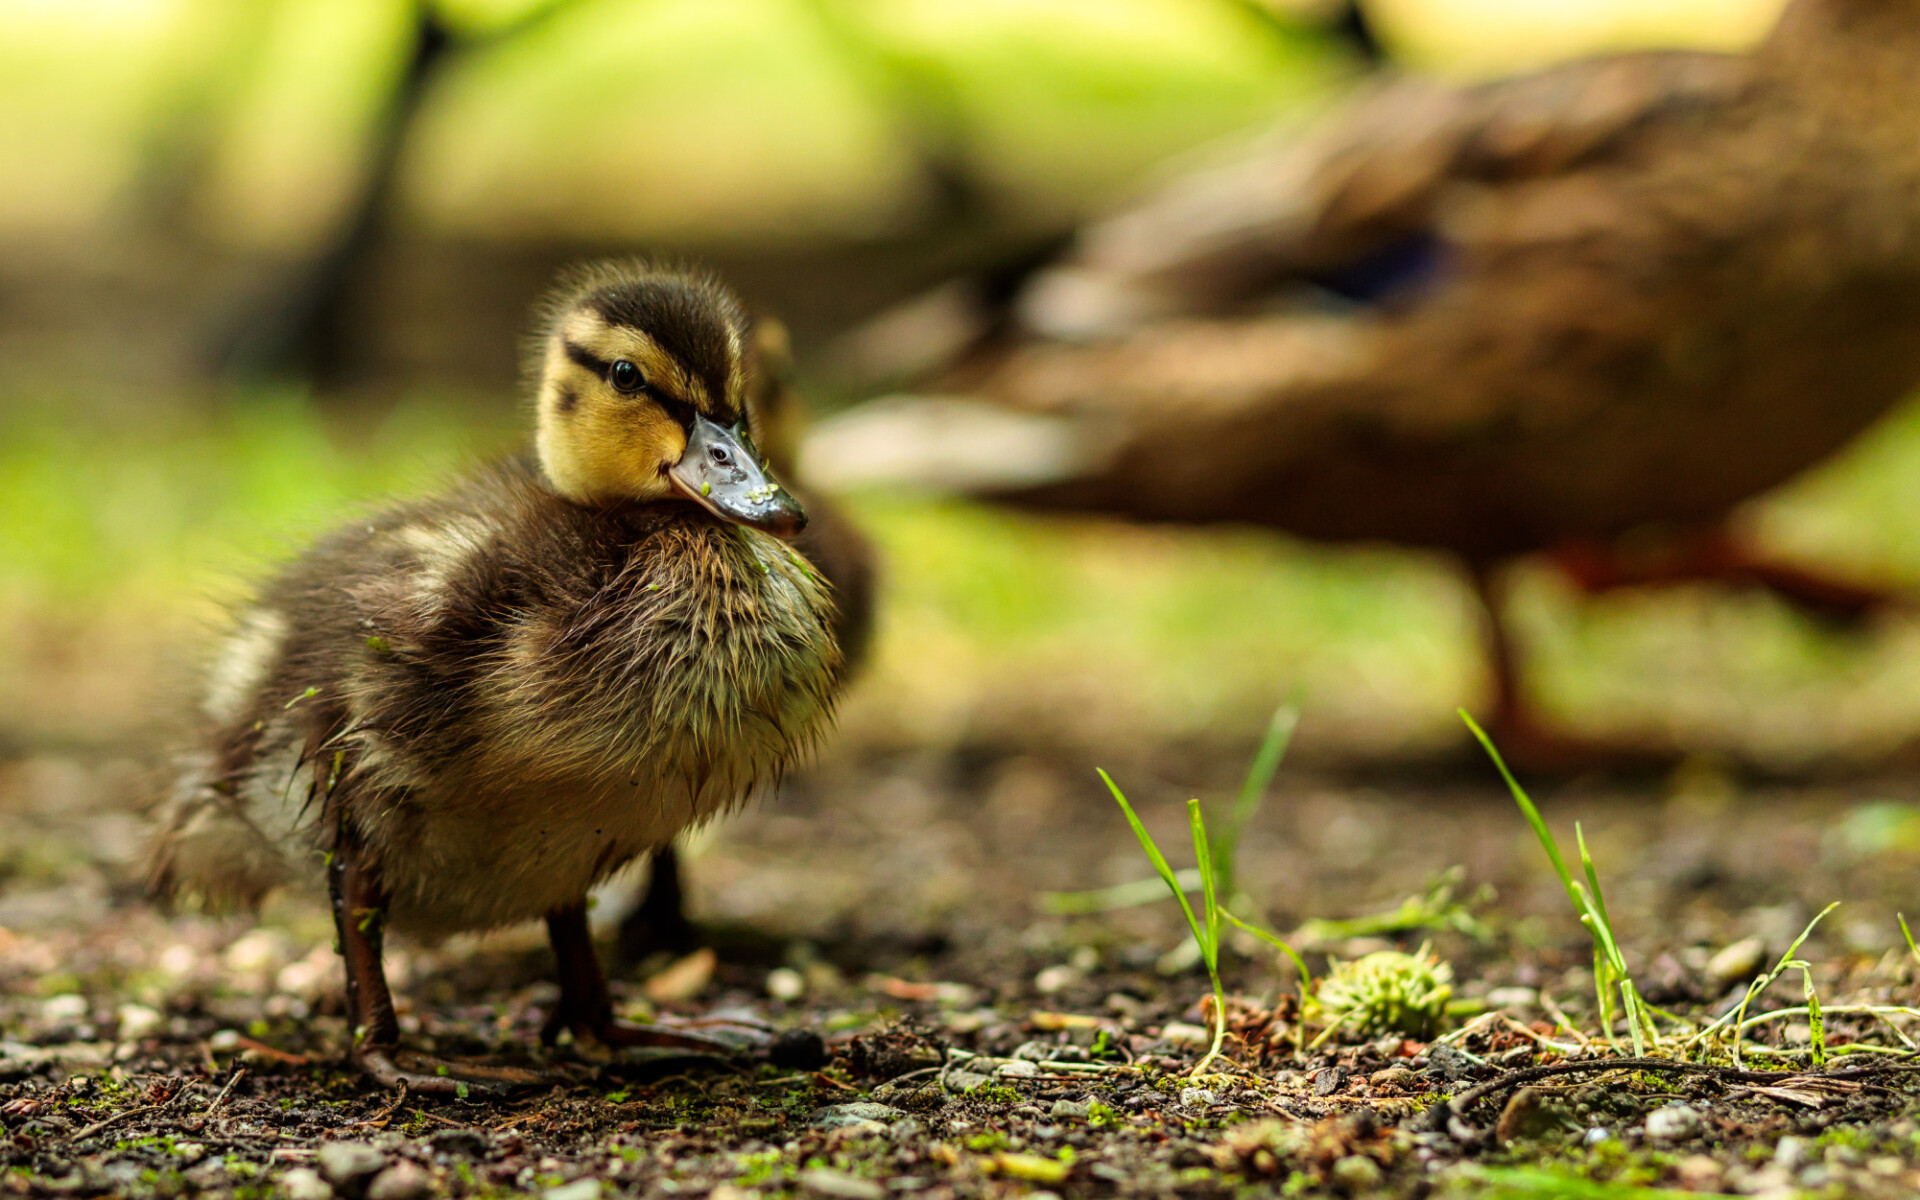 Portrait of a duckling